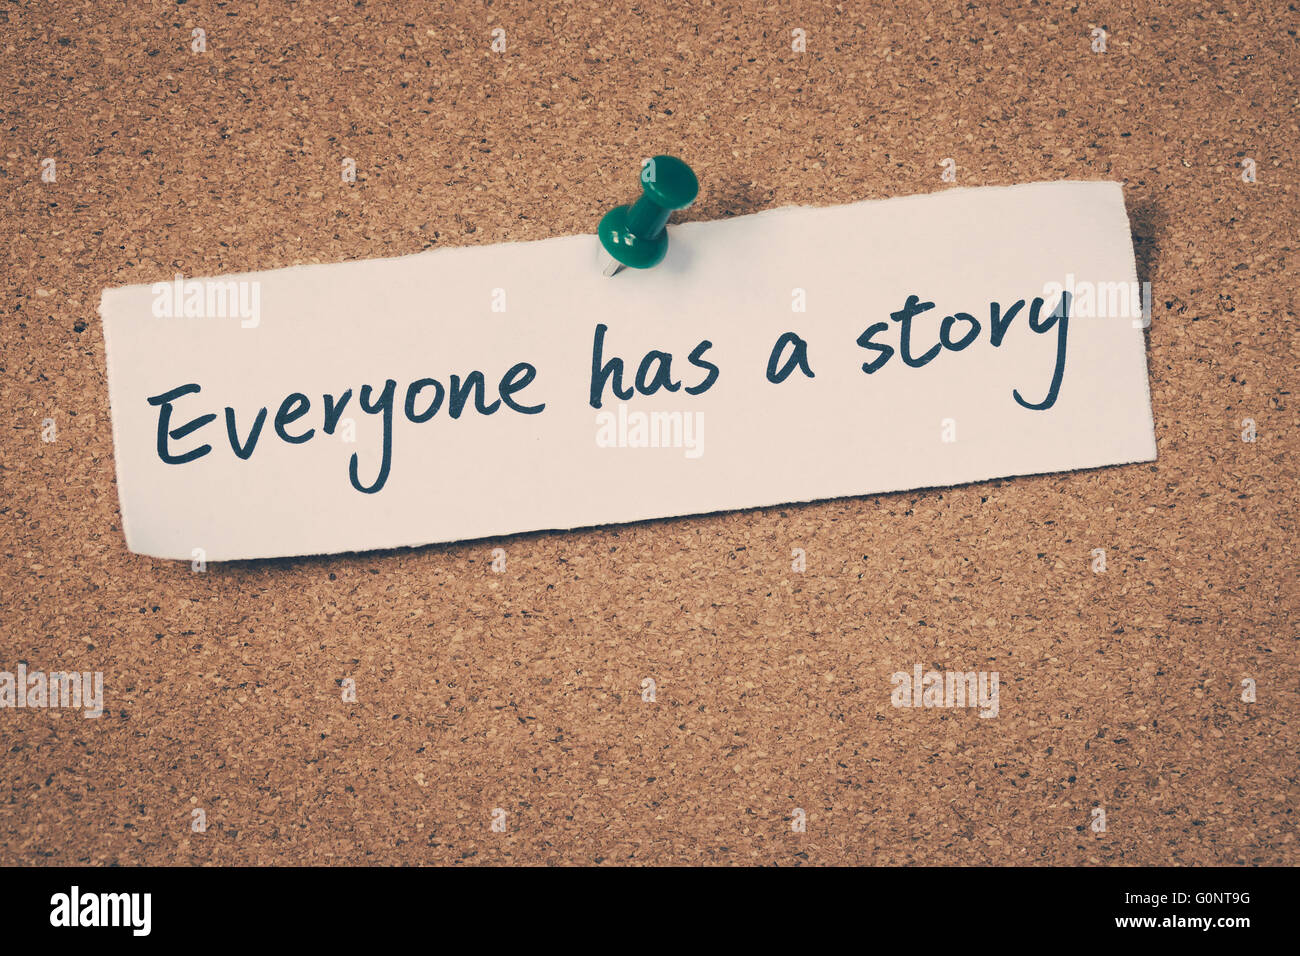 Everyone has a story Stock Photo